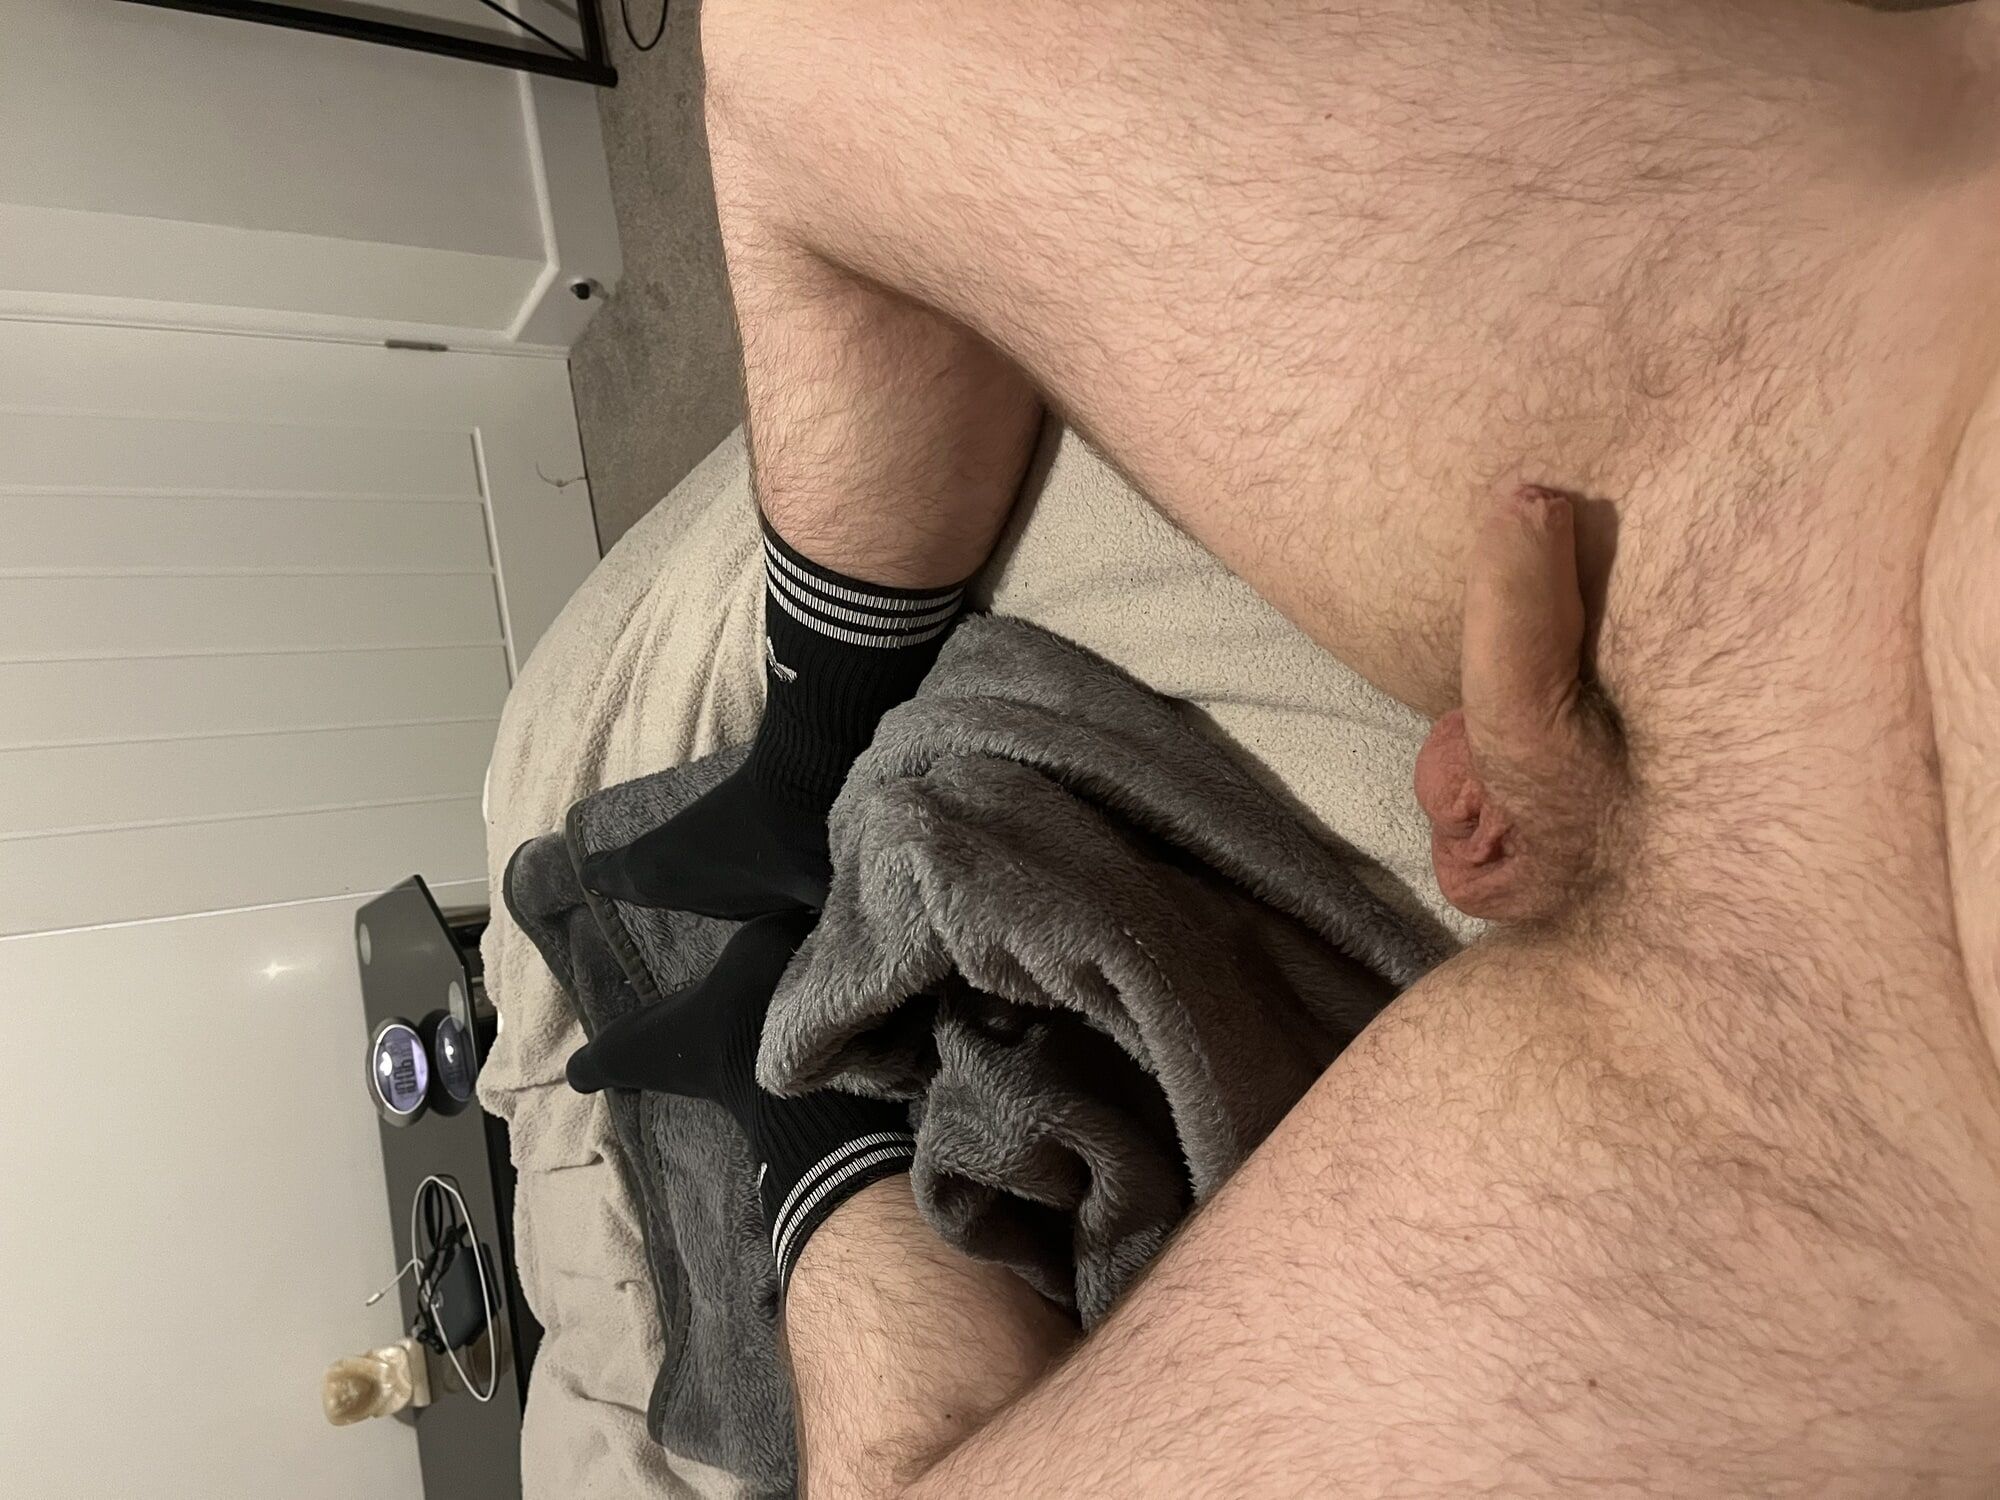 My tiny dick for humiliation  #4